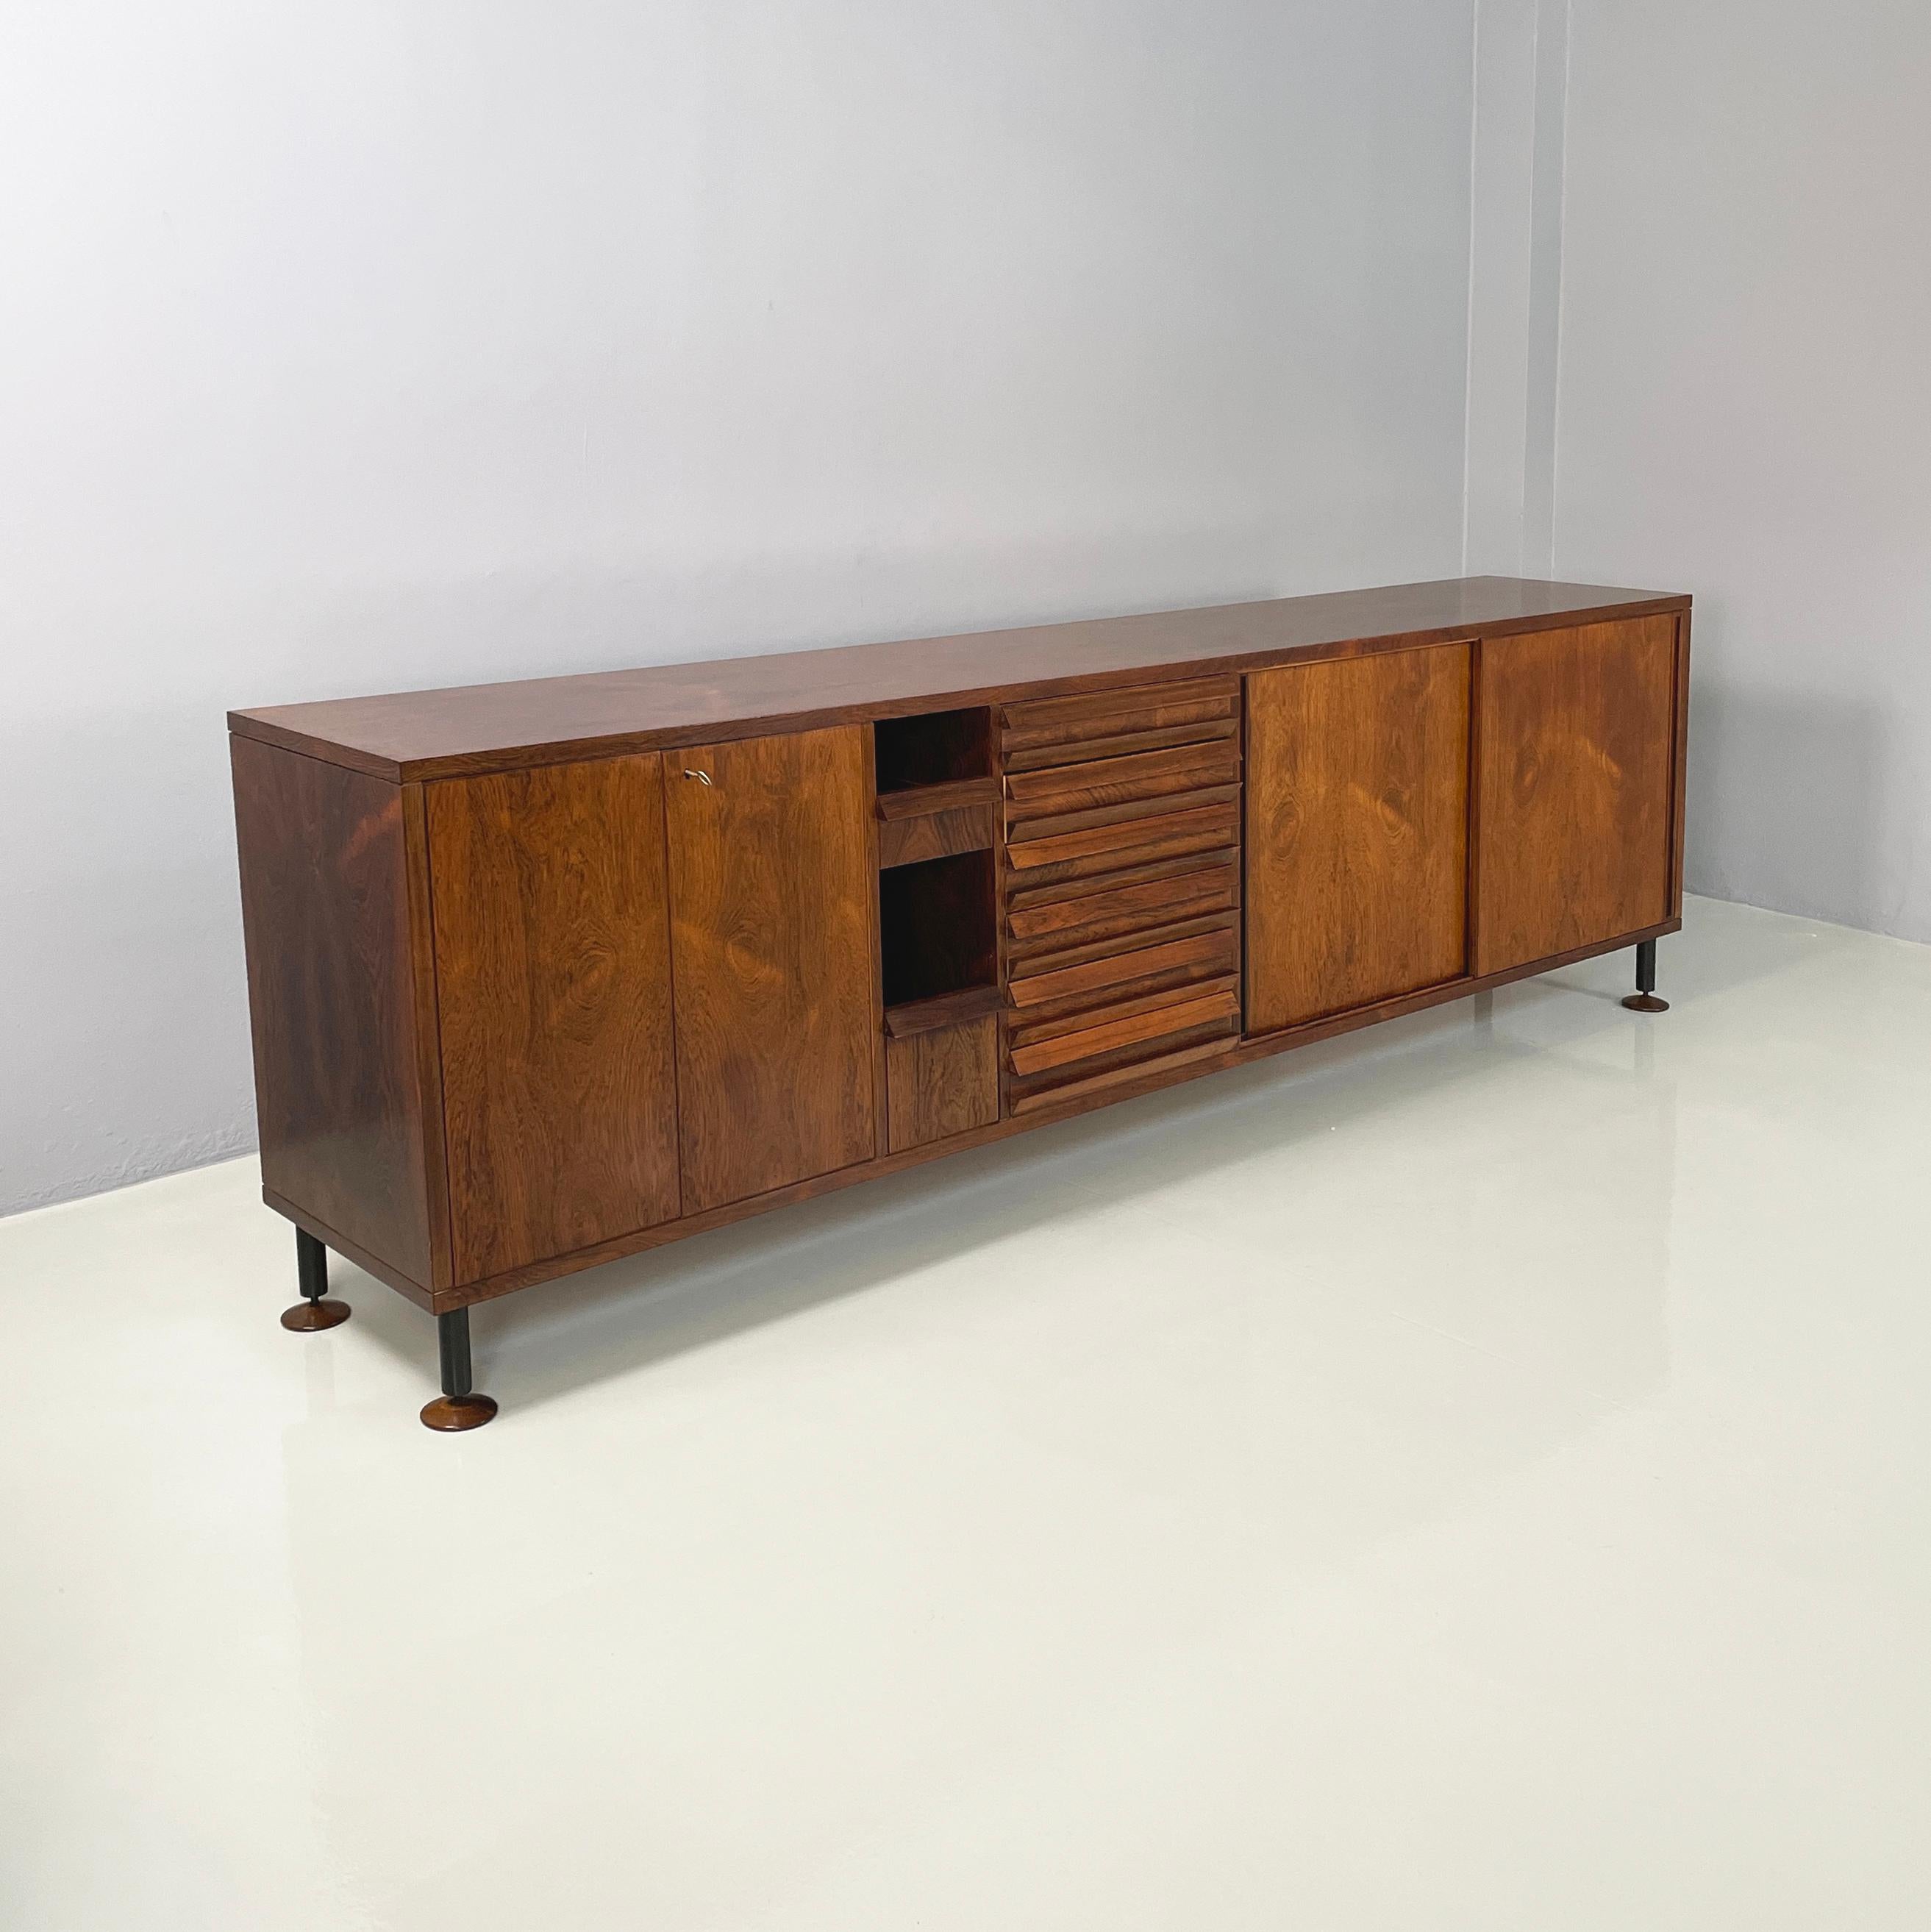 Italian mid-century modern Wooden sideboard with drawers and shelves, 1960s
Sideboard with rectangular base made entirely of wood. On the front it has several compartments: one with a red-burgundy painted internal shelves and 2 hinged doors, two